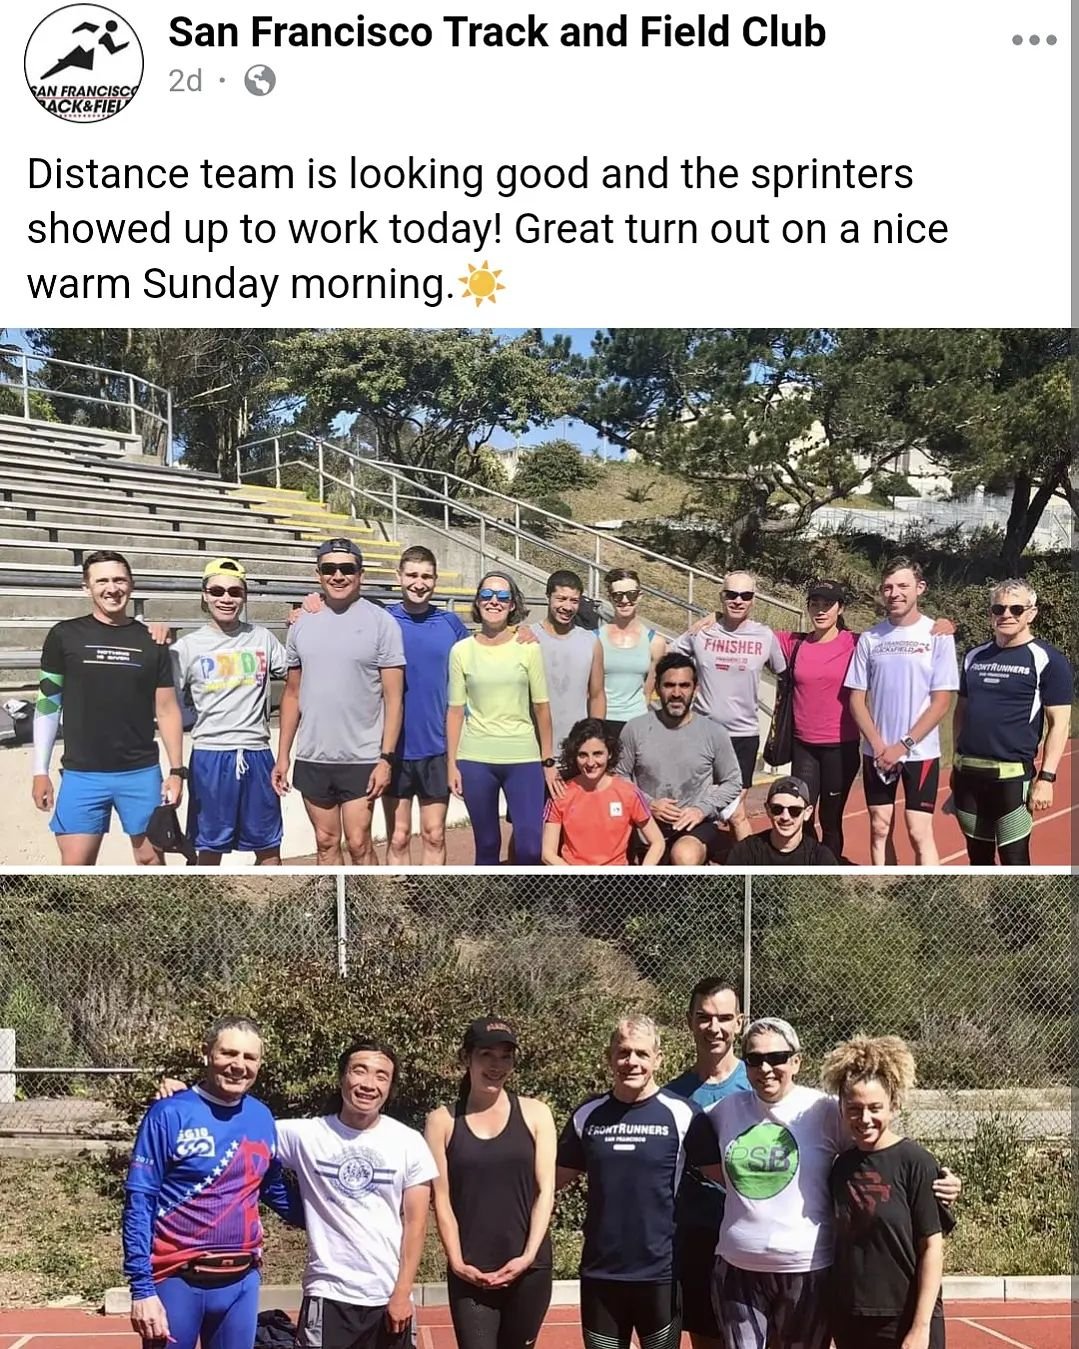 Love to see it! Lots of new members joining the @sftrackandfield club in the last few weeks, working out the together and getting ready for Pride Meet. Only 6 more weeks to sharpen up!